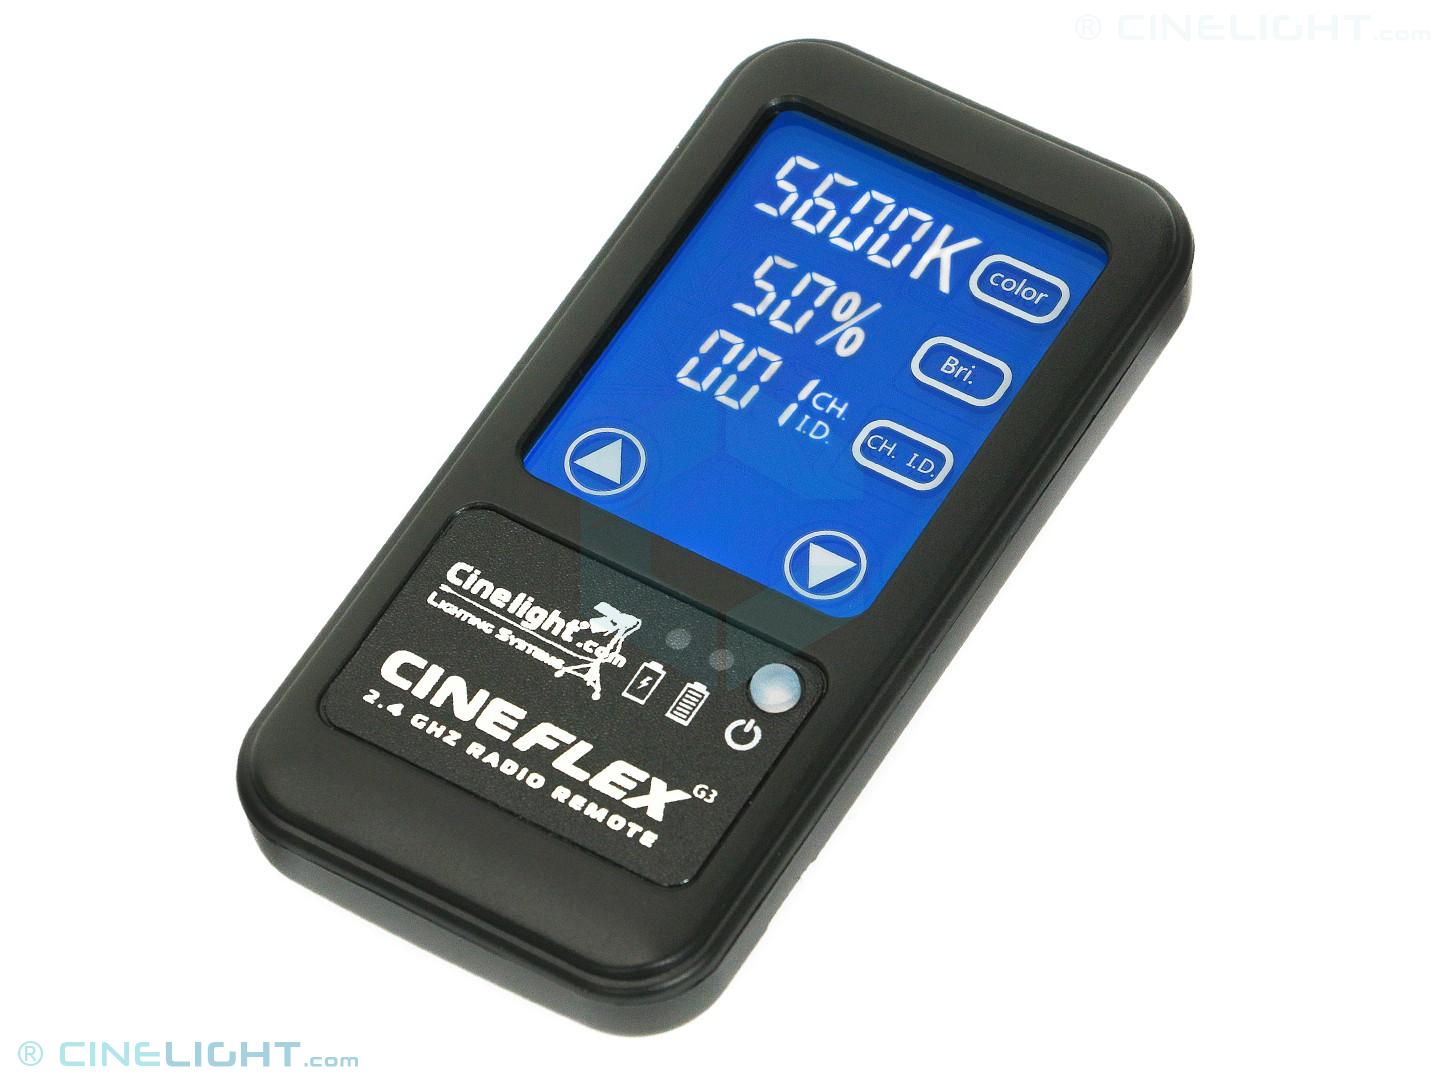 Touch Screen Remote for CineFLEX